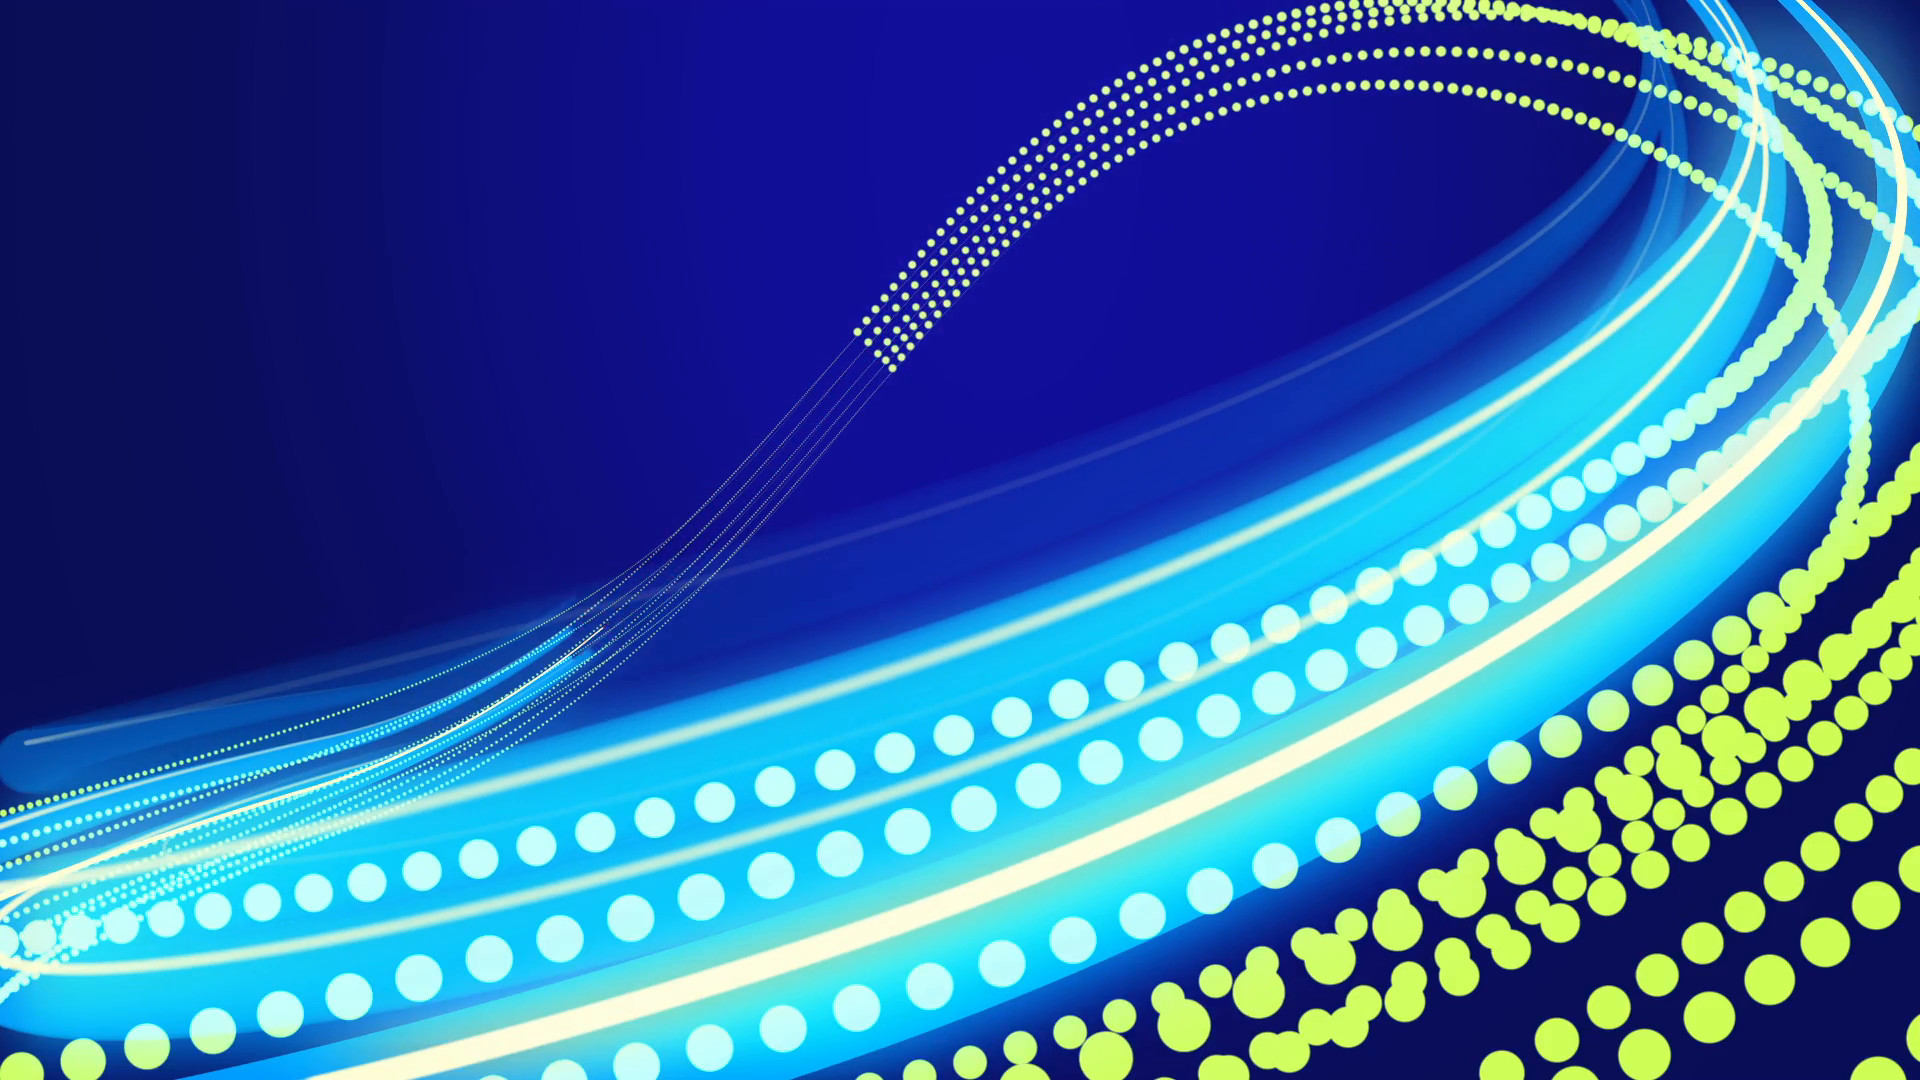 1920x1080 Subscription Library Animated blue abstract background with blurred magic  neon light curved lines.